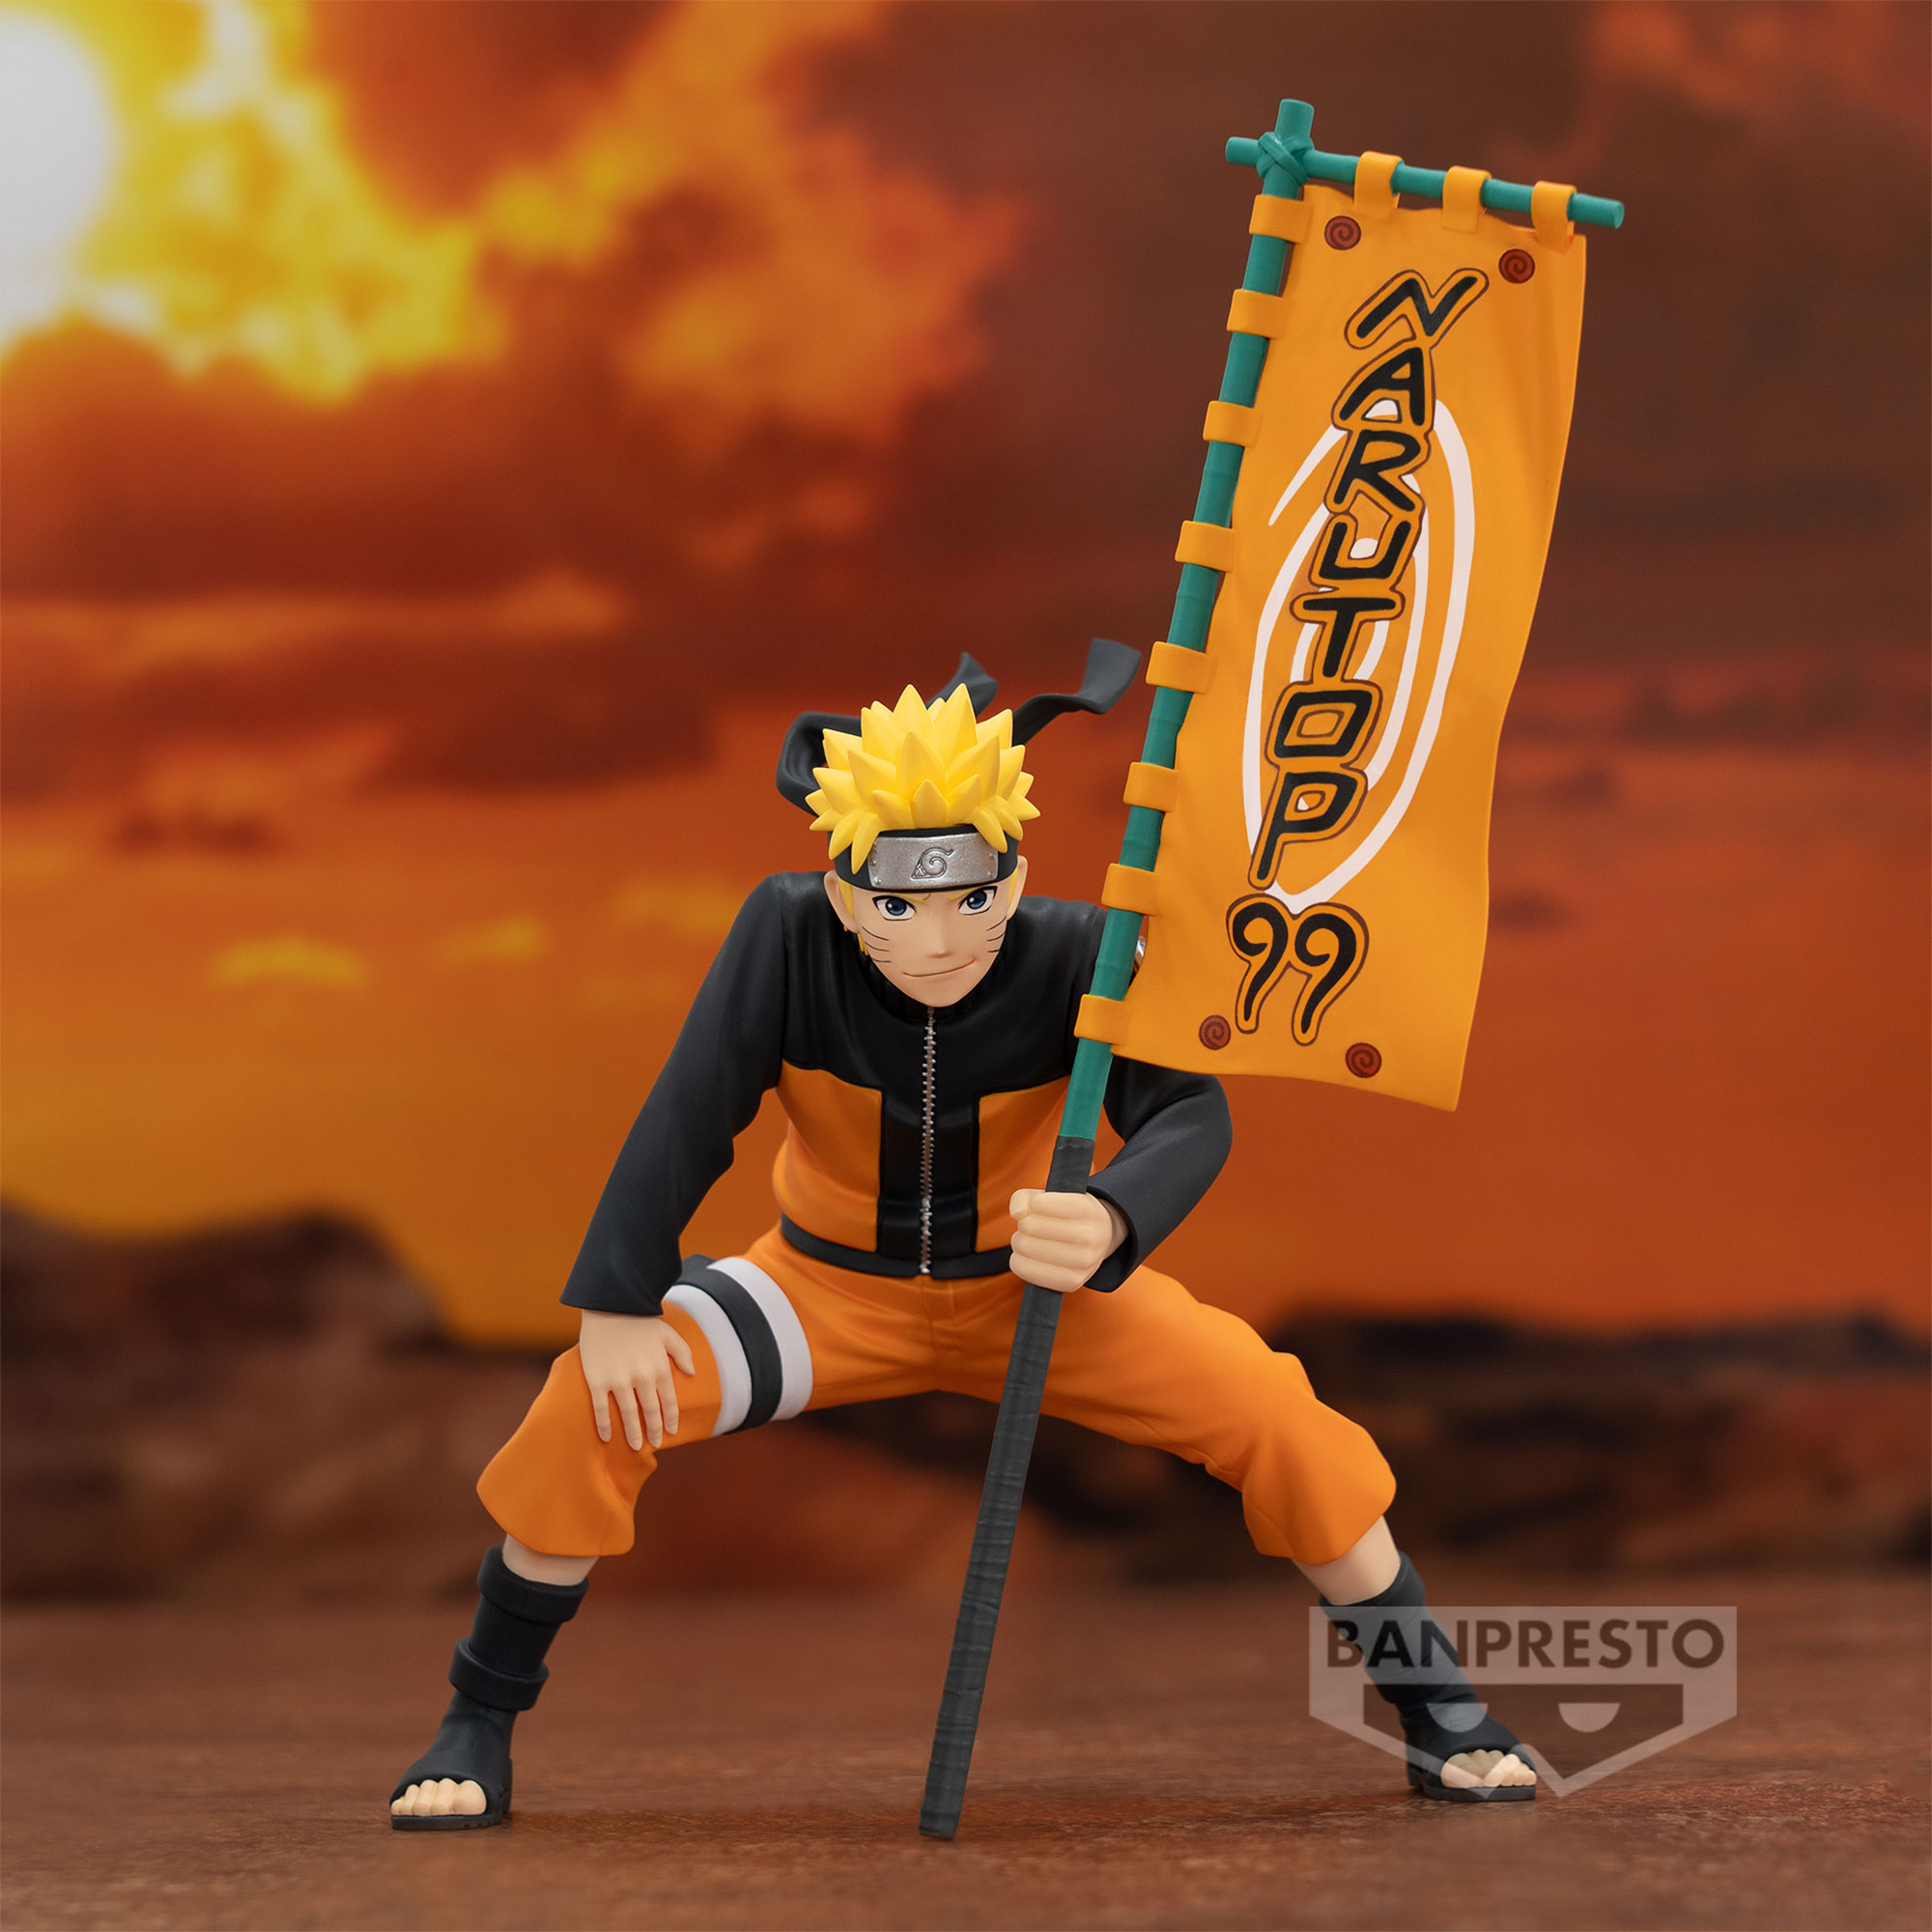 Naruto Online Mobile : All Characters! (October 2018) 